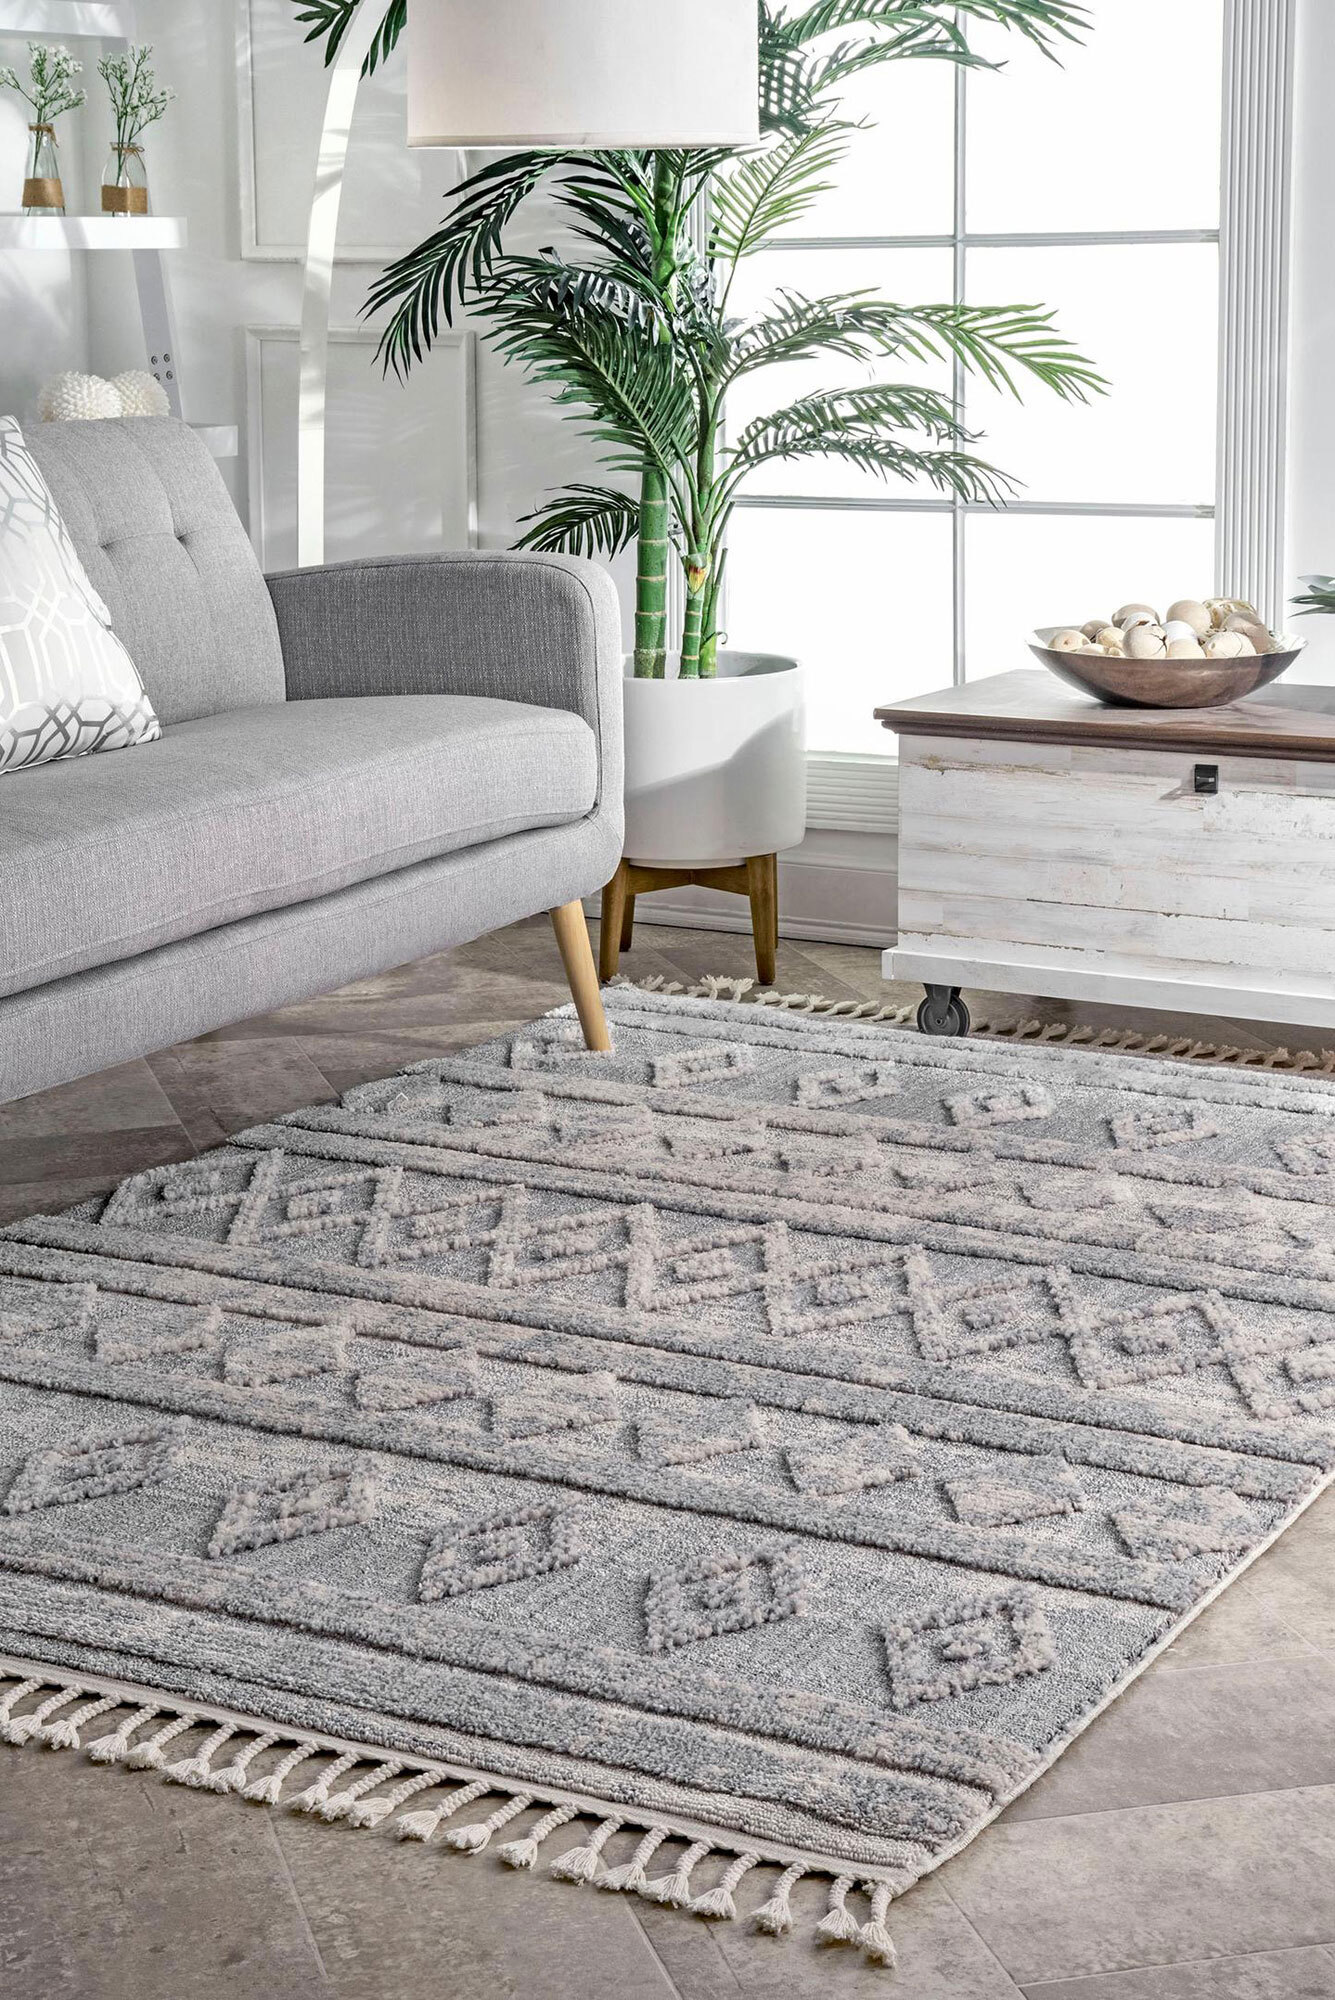 Aroma Textured Moroccan Rug(Size 180 x 120cm)